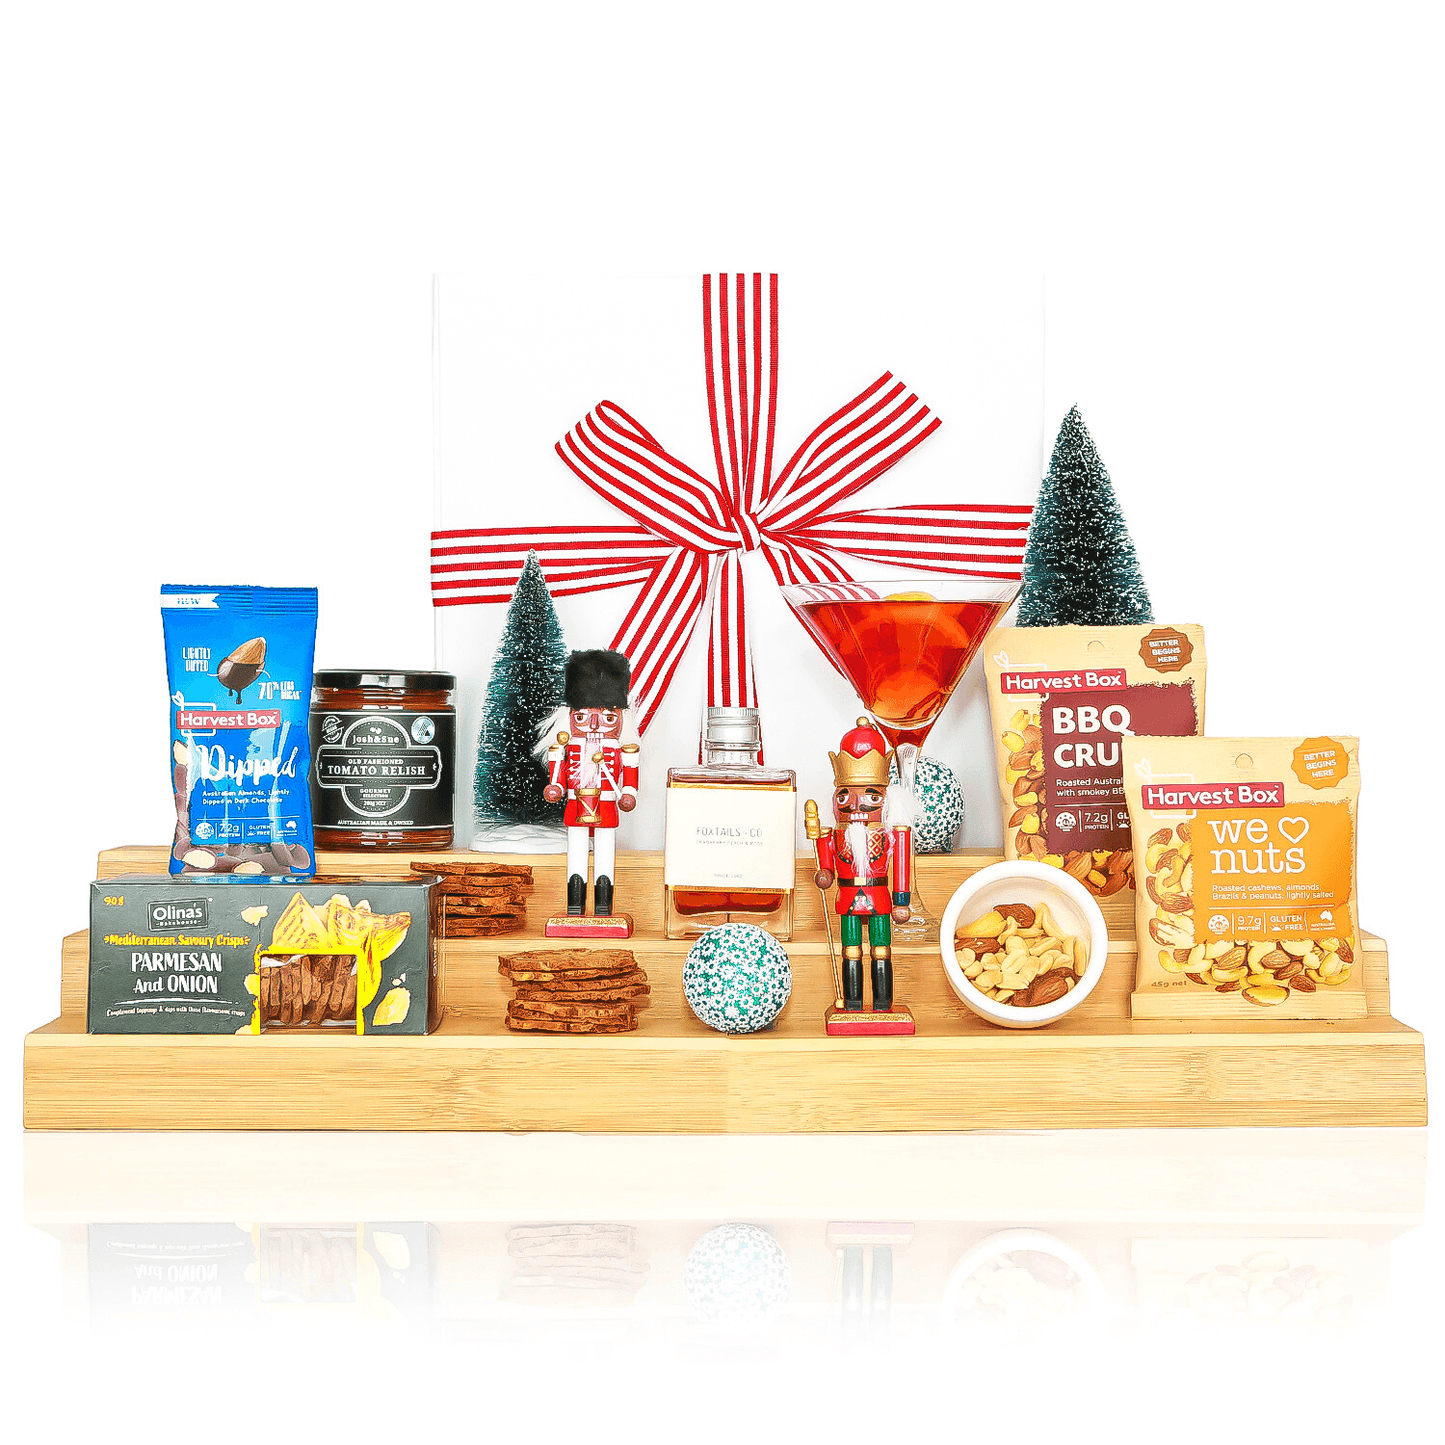 Christmas Cocktails - Healthy Belly Hampers - pure indulgence - birthday hampers - gift hampers - gift hampers melbourne - gift hampers australia - organic hampers -vegan hampers - gluten free hampers - birthday hampers -anniversary hampers - wedding hampers - alcohol hampers